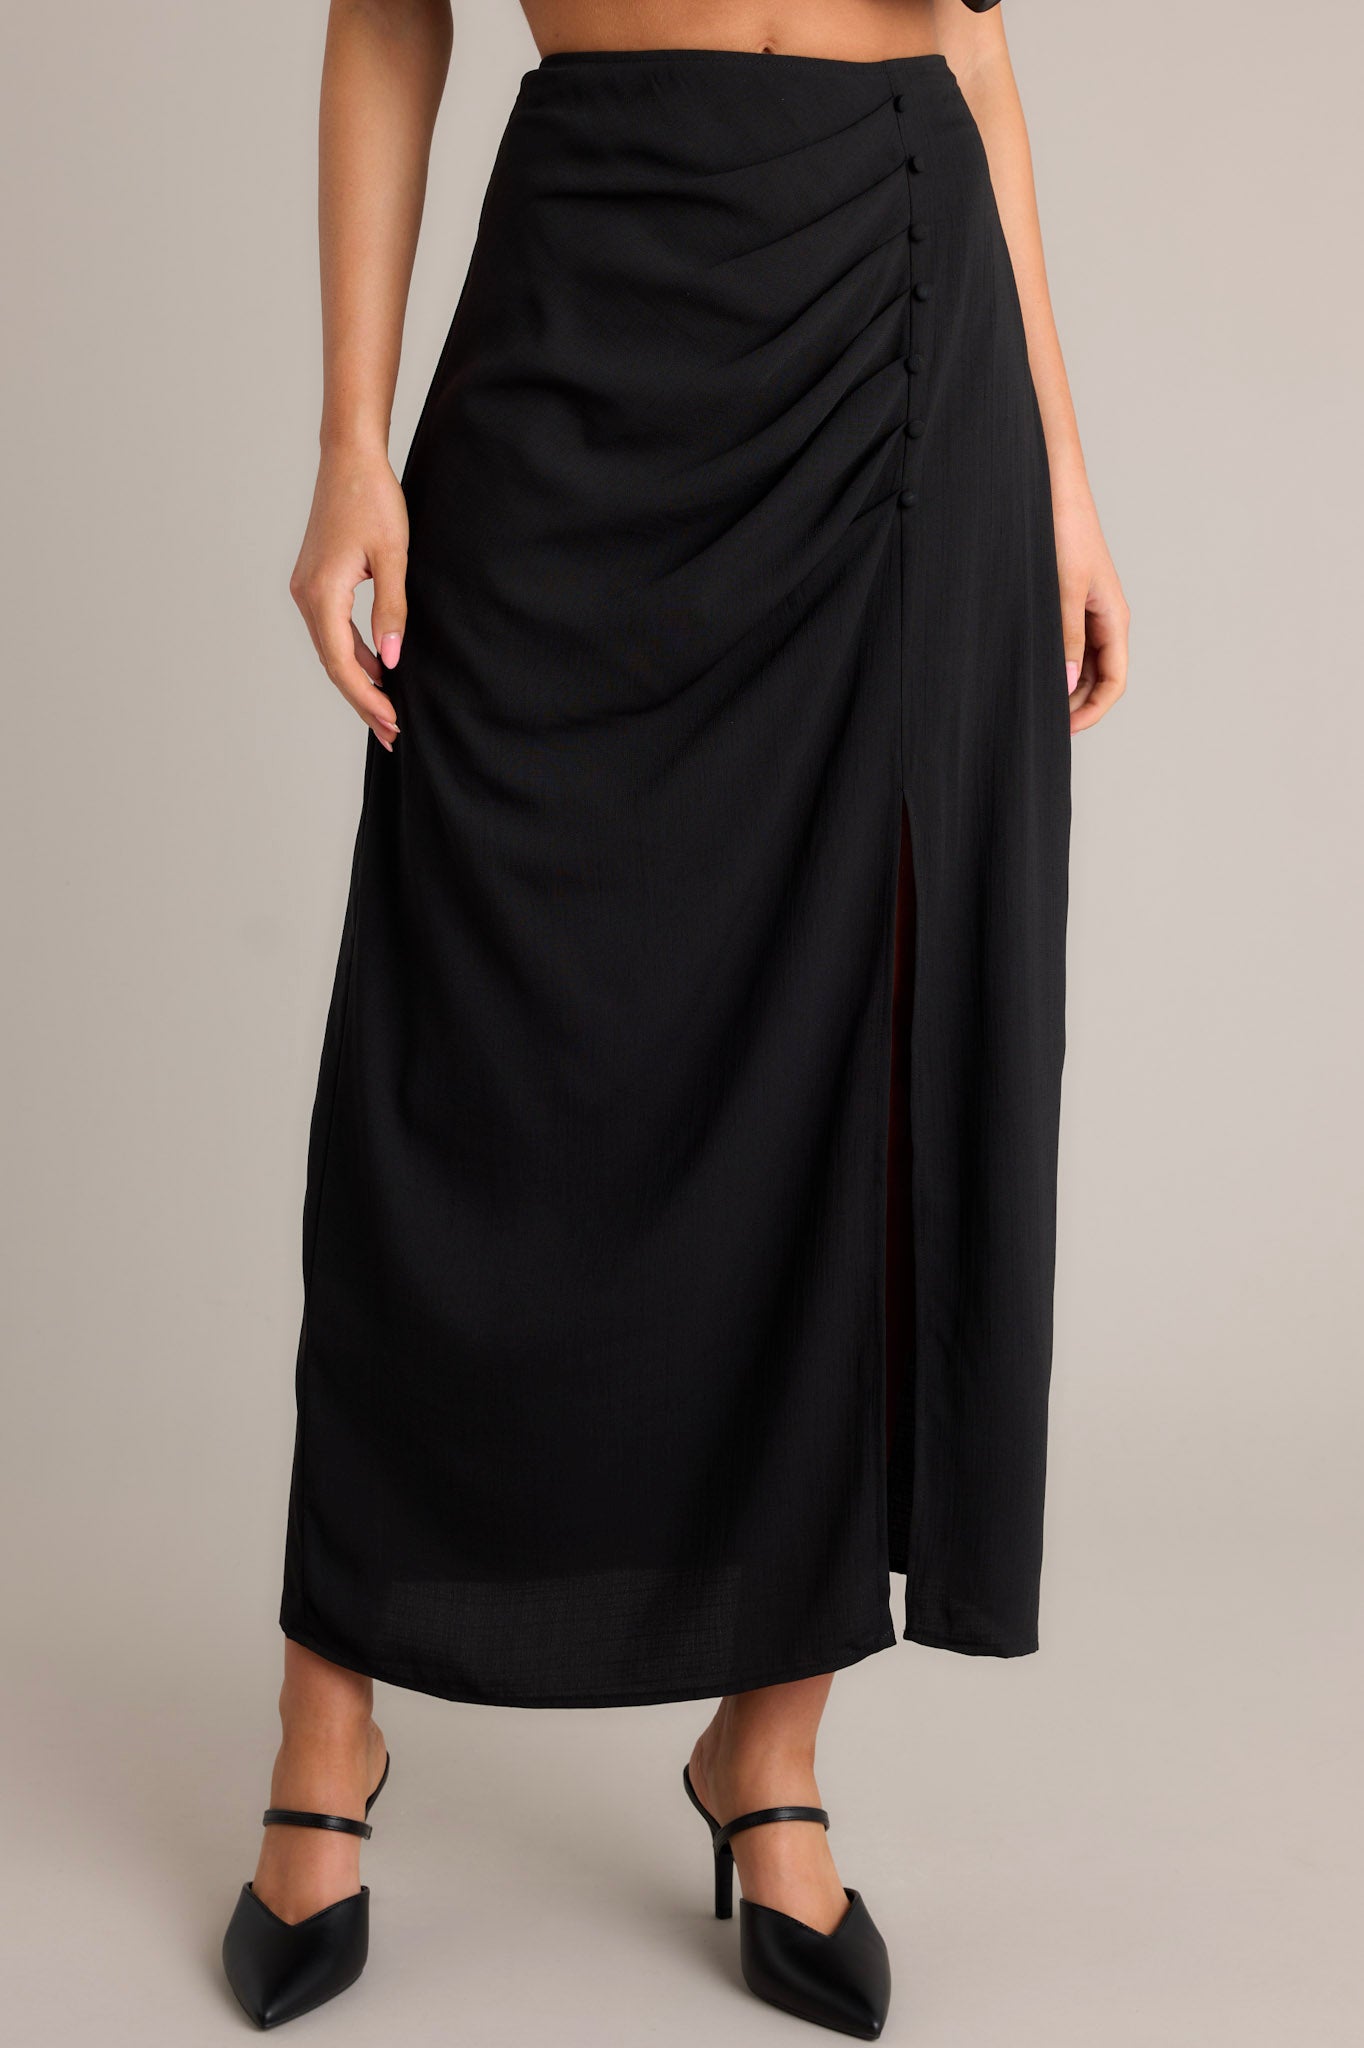 Front view of this black midi skirt featuring a high waisted design, pleated detailing on the hip, faux buttons, a discrete side zipper, and a side slit.